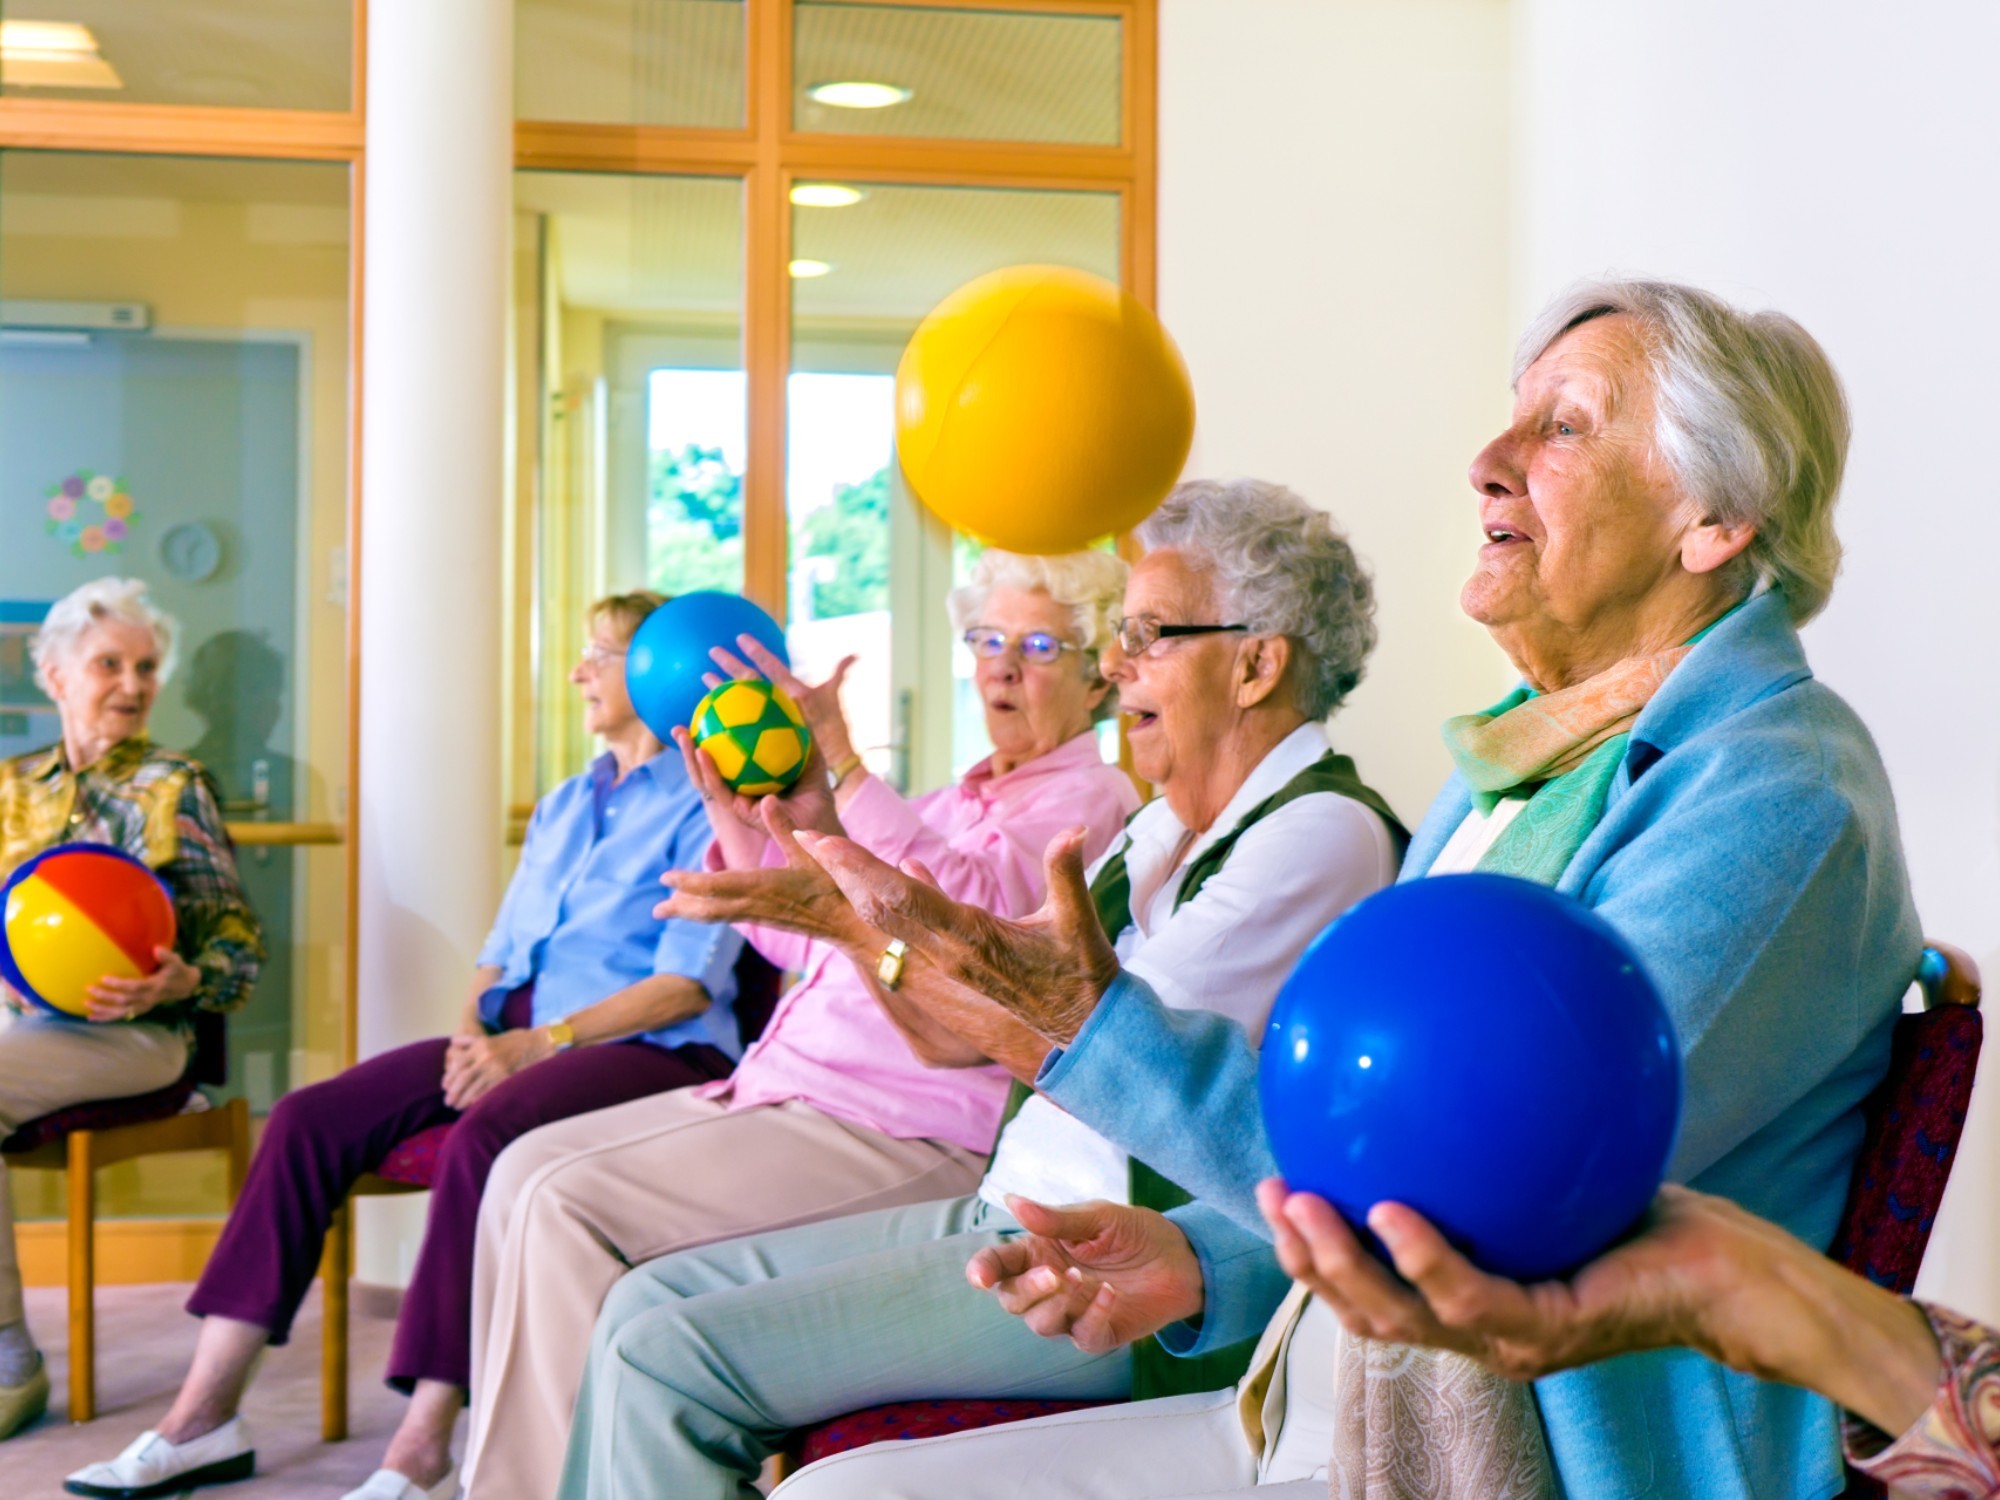 Older people doing an activity with balloons.